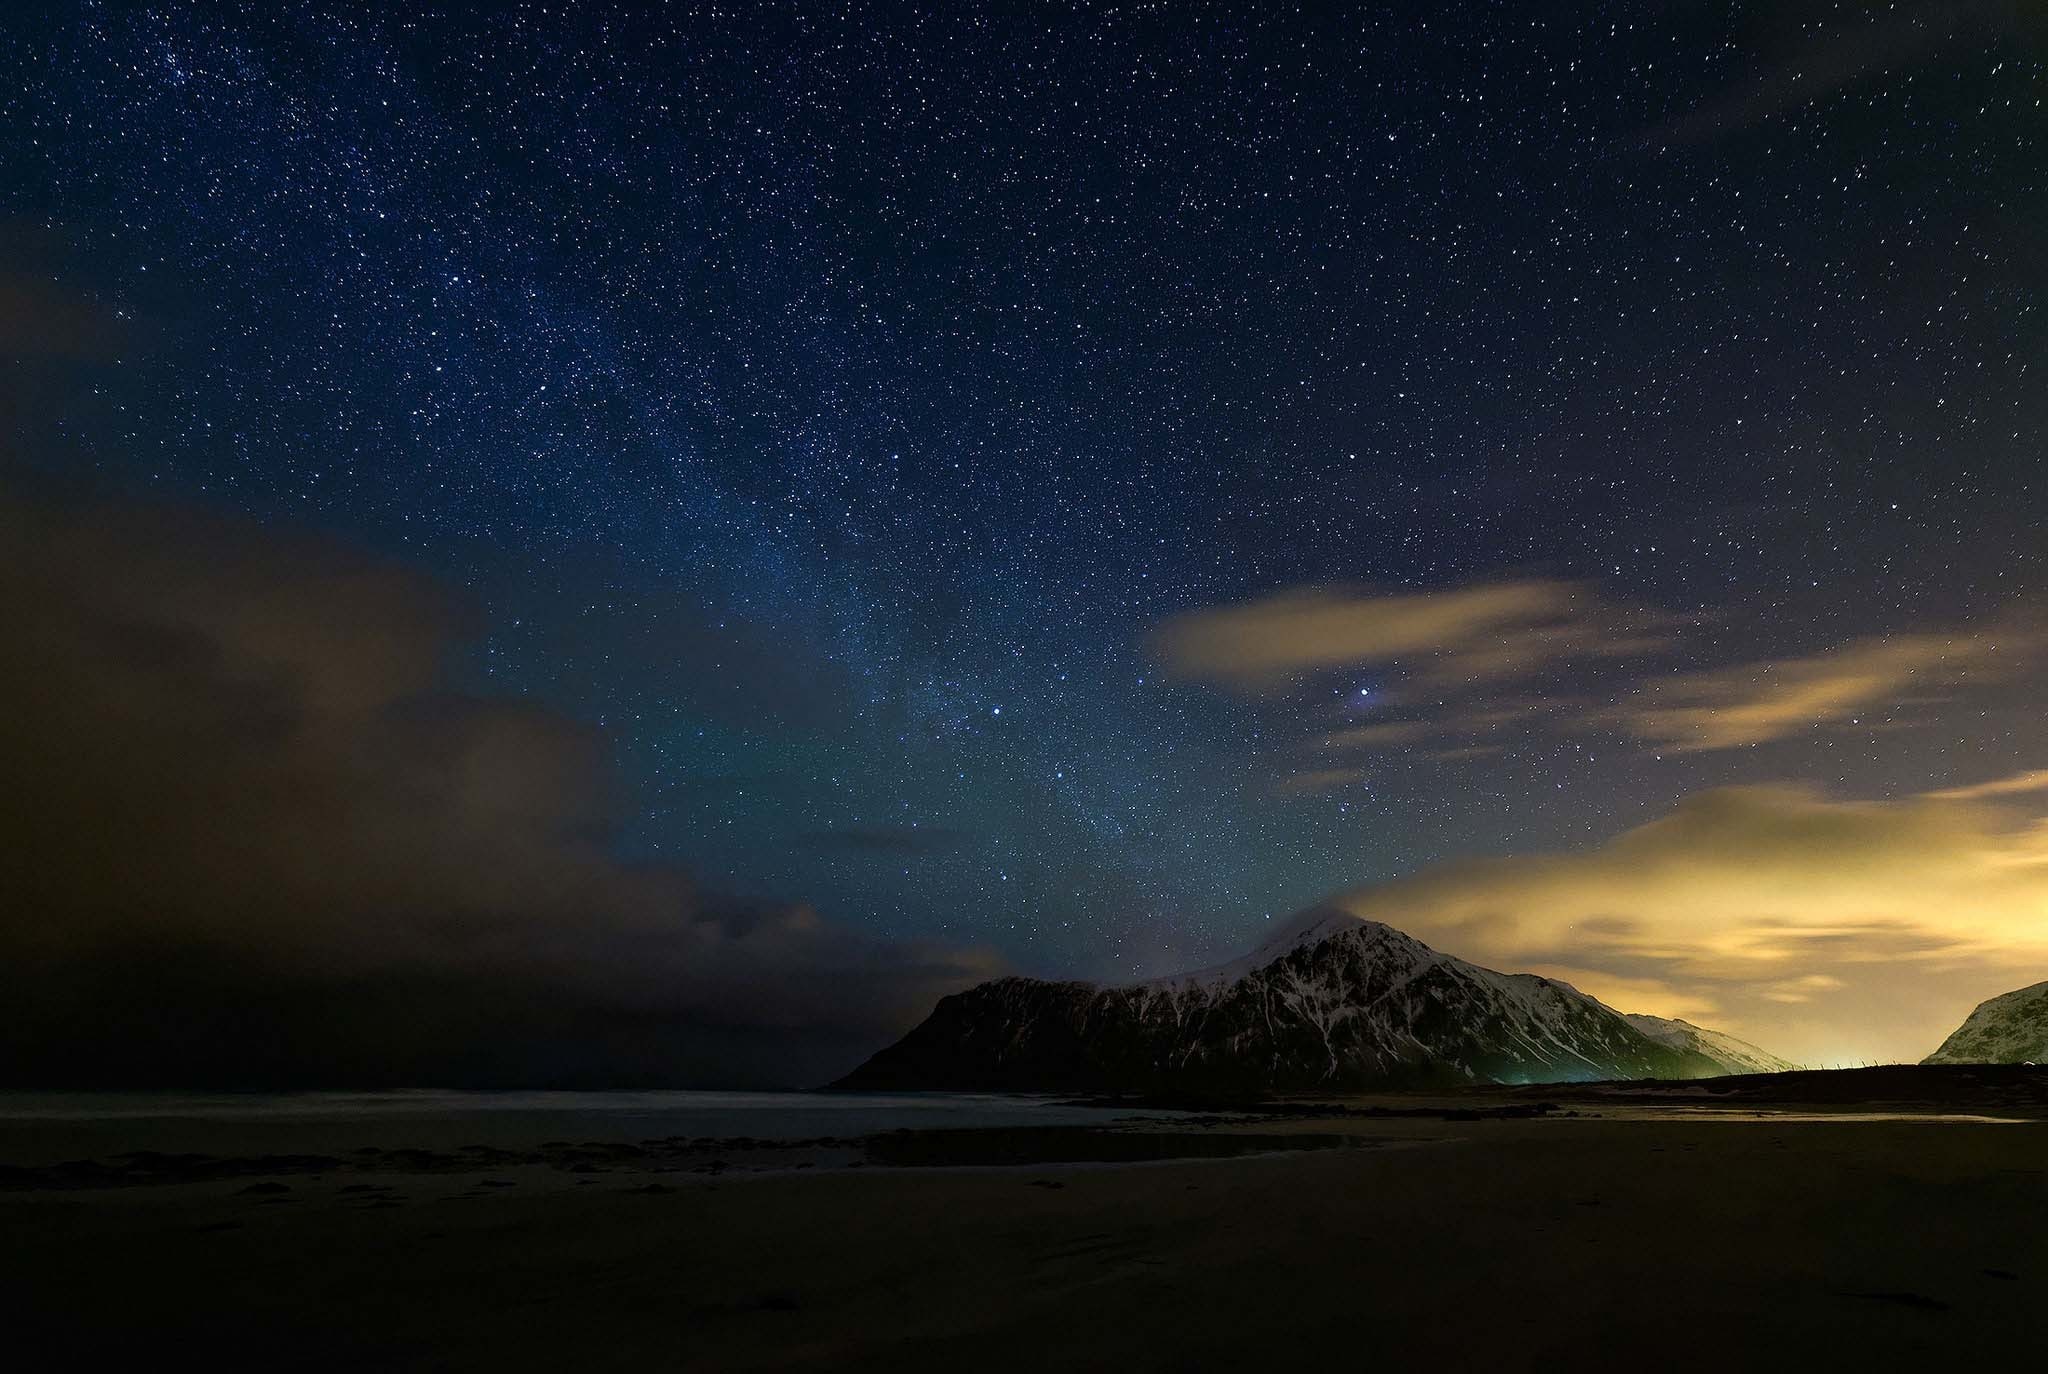 General 2048x1374 nature landscape Arctic sky starry night beach mountains clouds snowy peak sea Milky Way long exposure lights